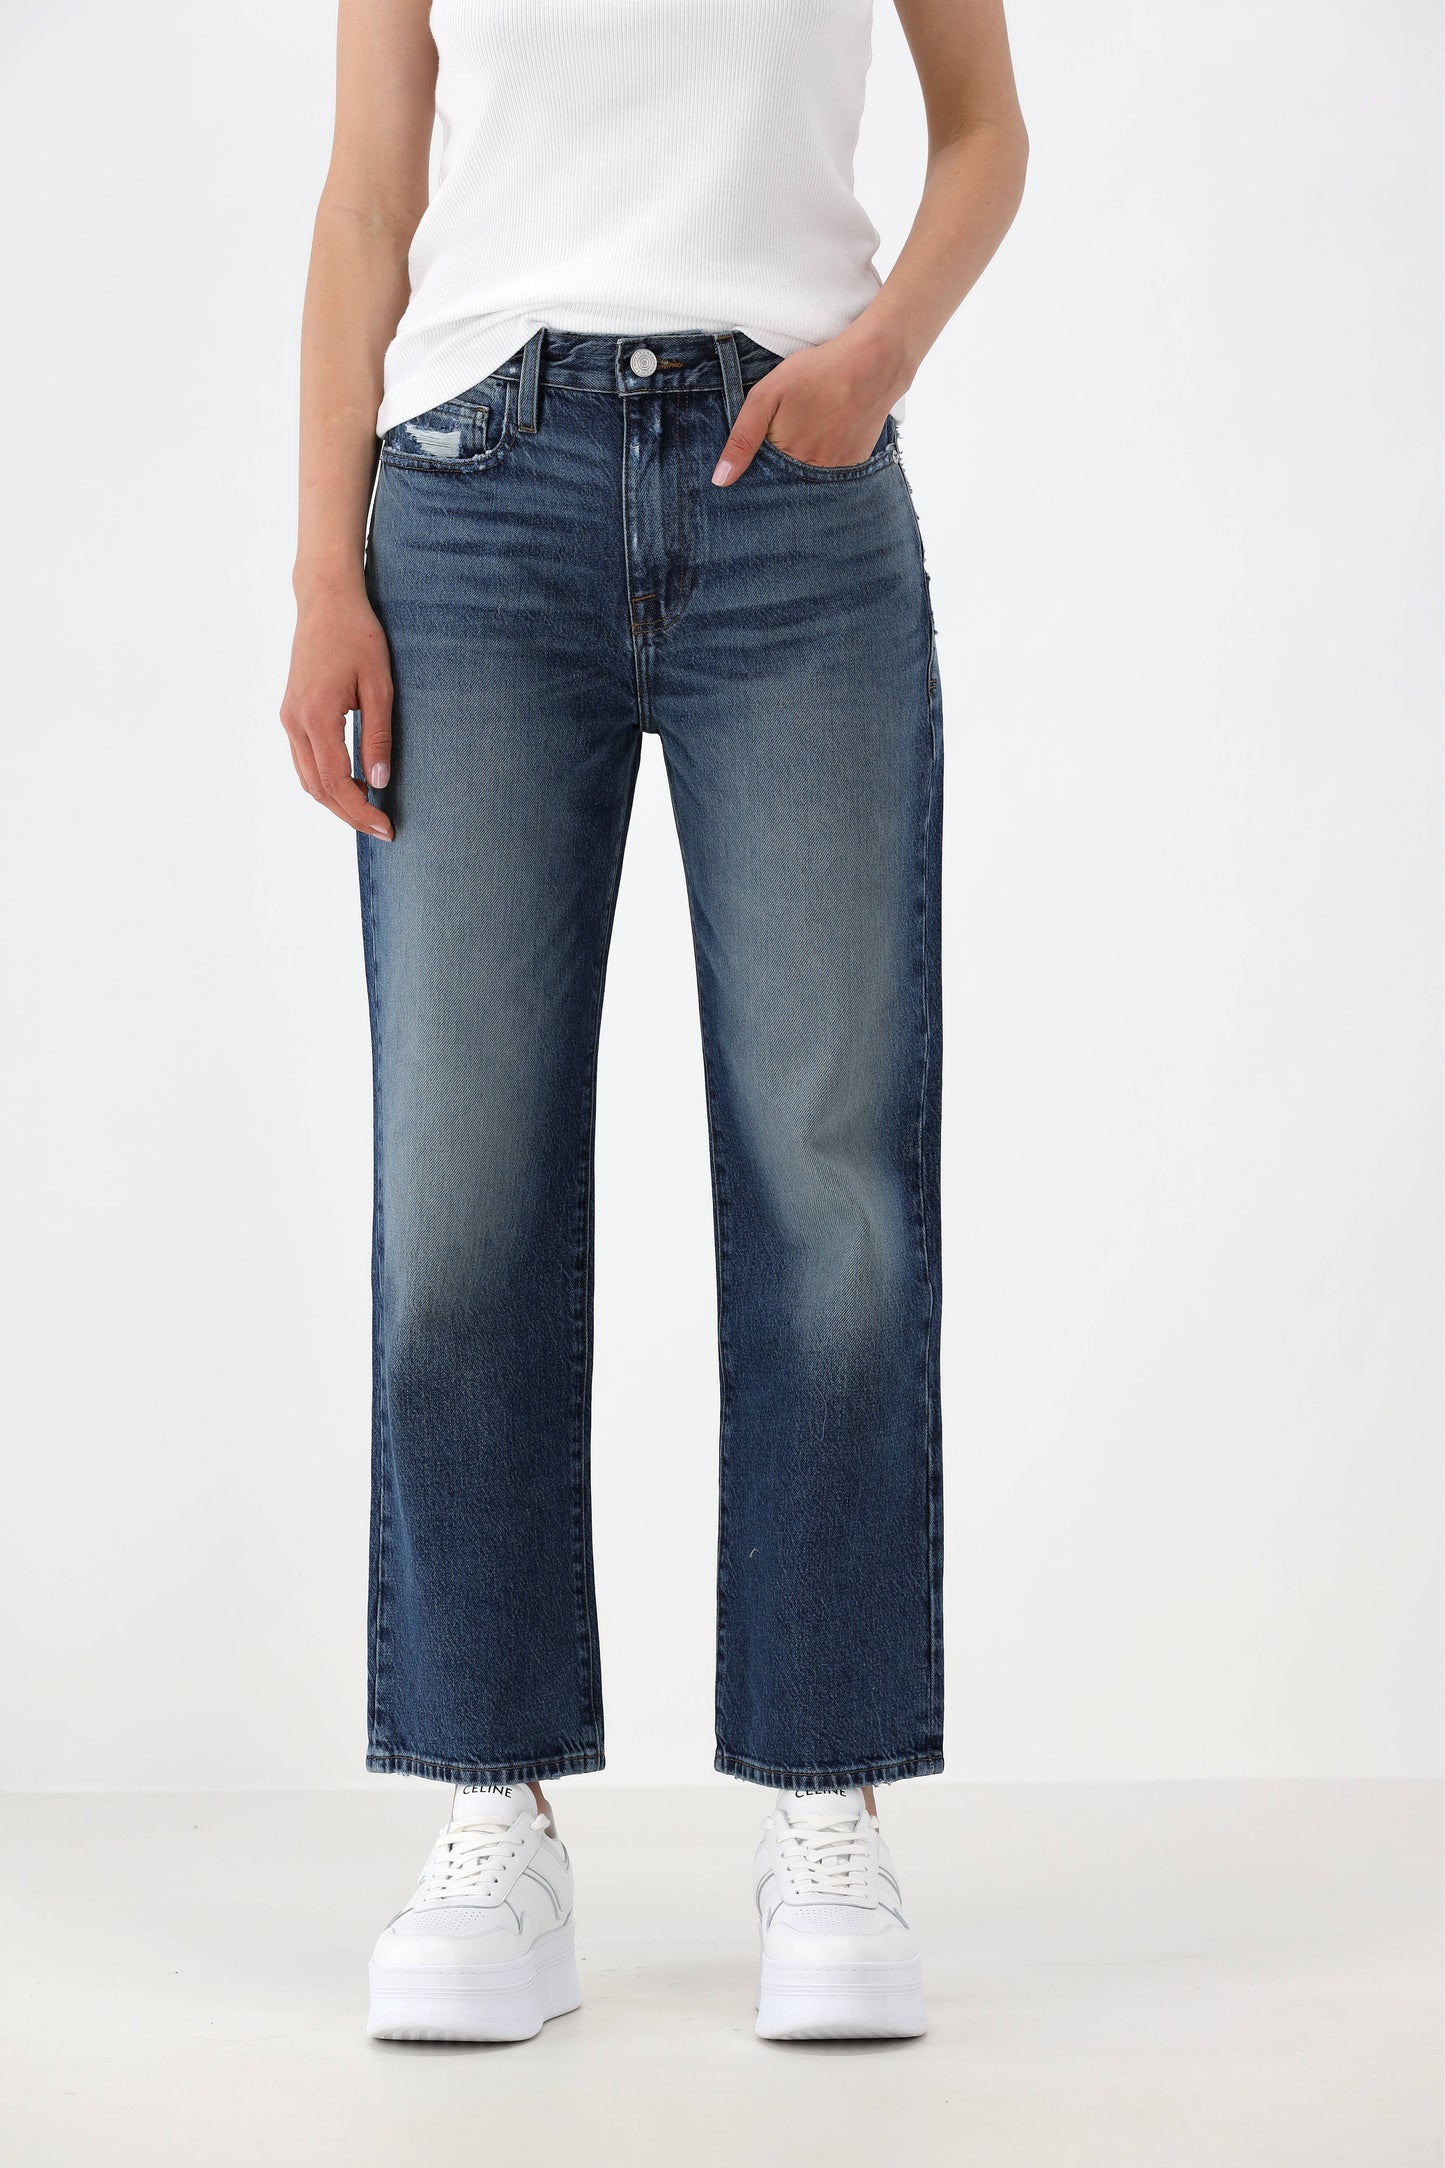 Jeans Le Jane Crop in NorthvilleFrame - Anita Hass